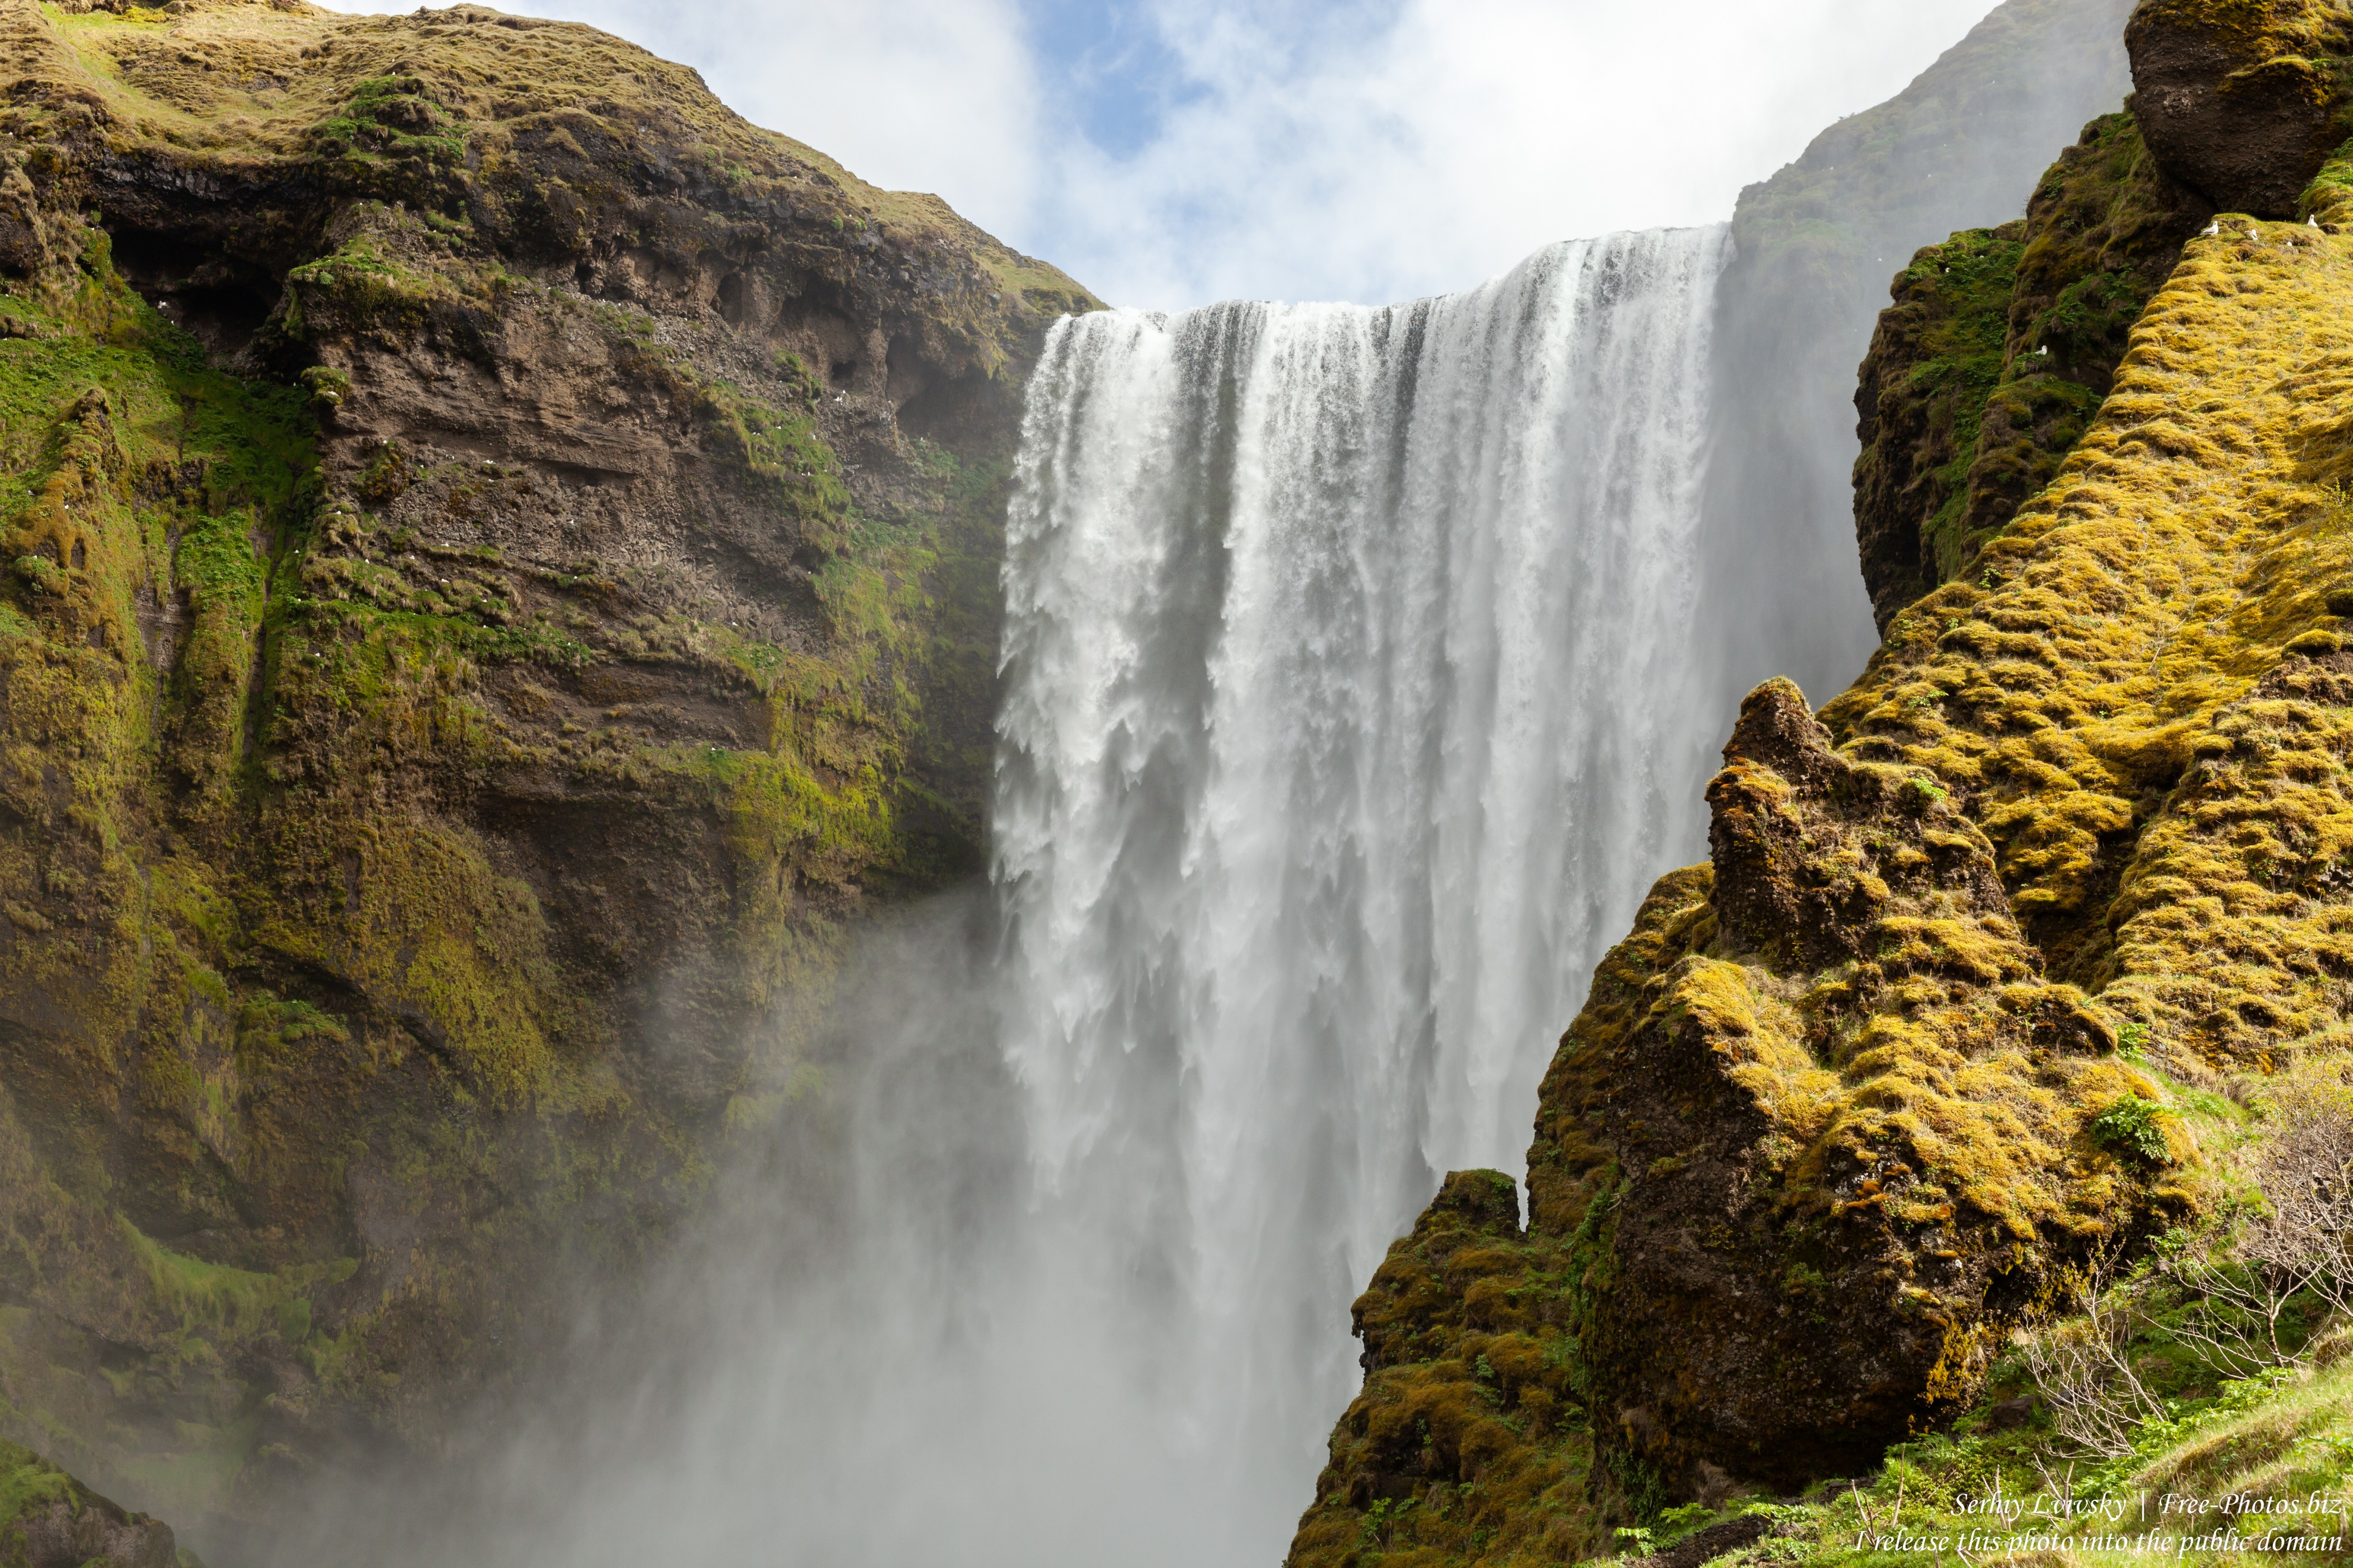 Skogafoss, Iceland, photographed in May 2019 by Serhiy Lvivsky, picture 2